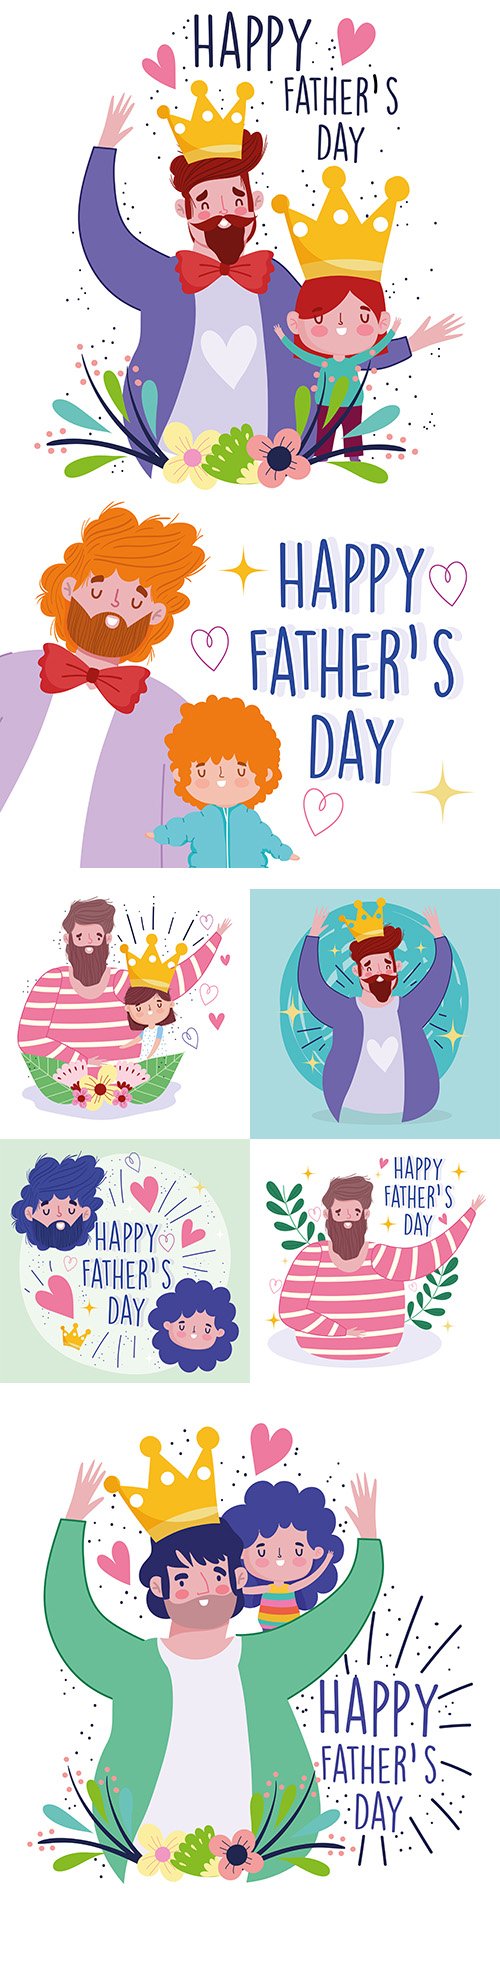 Happy Father 's Day design greeting card and banner 4